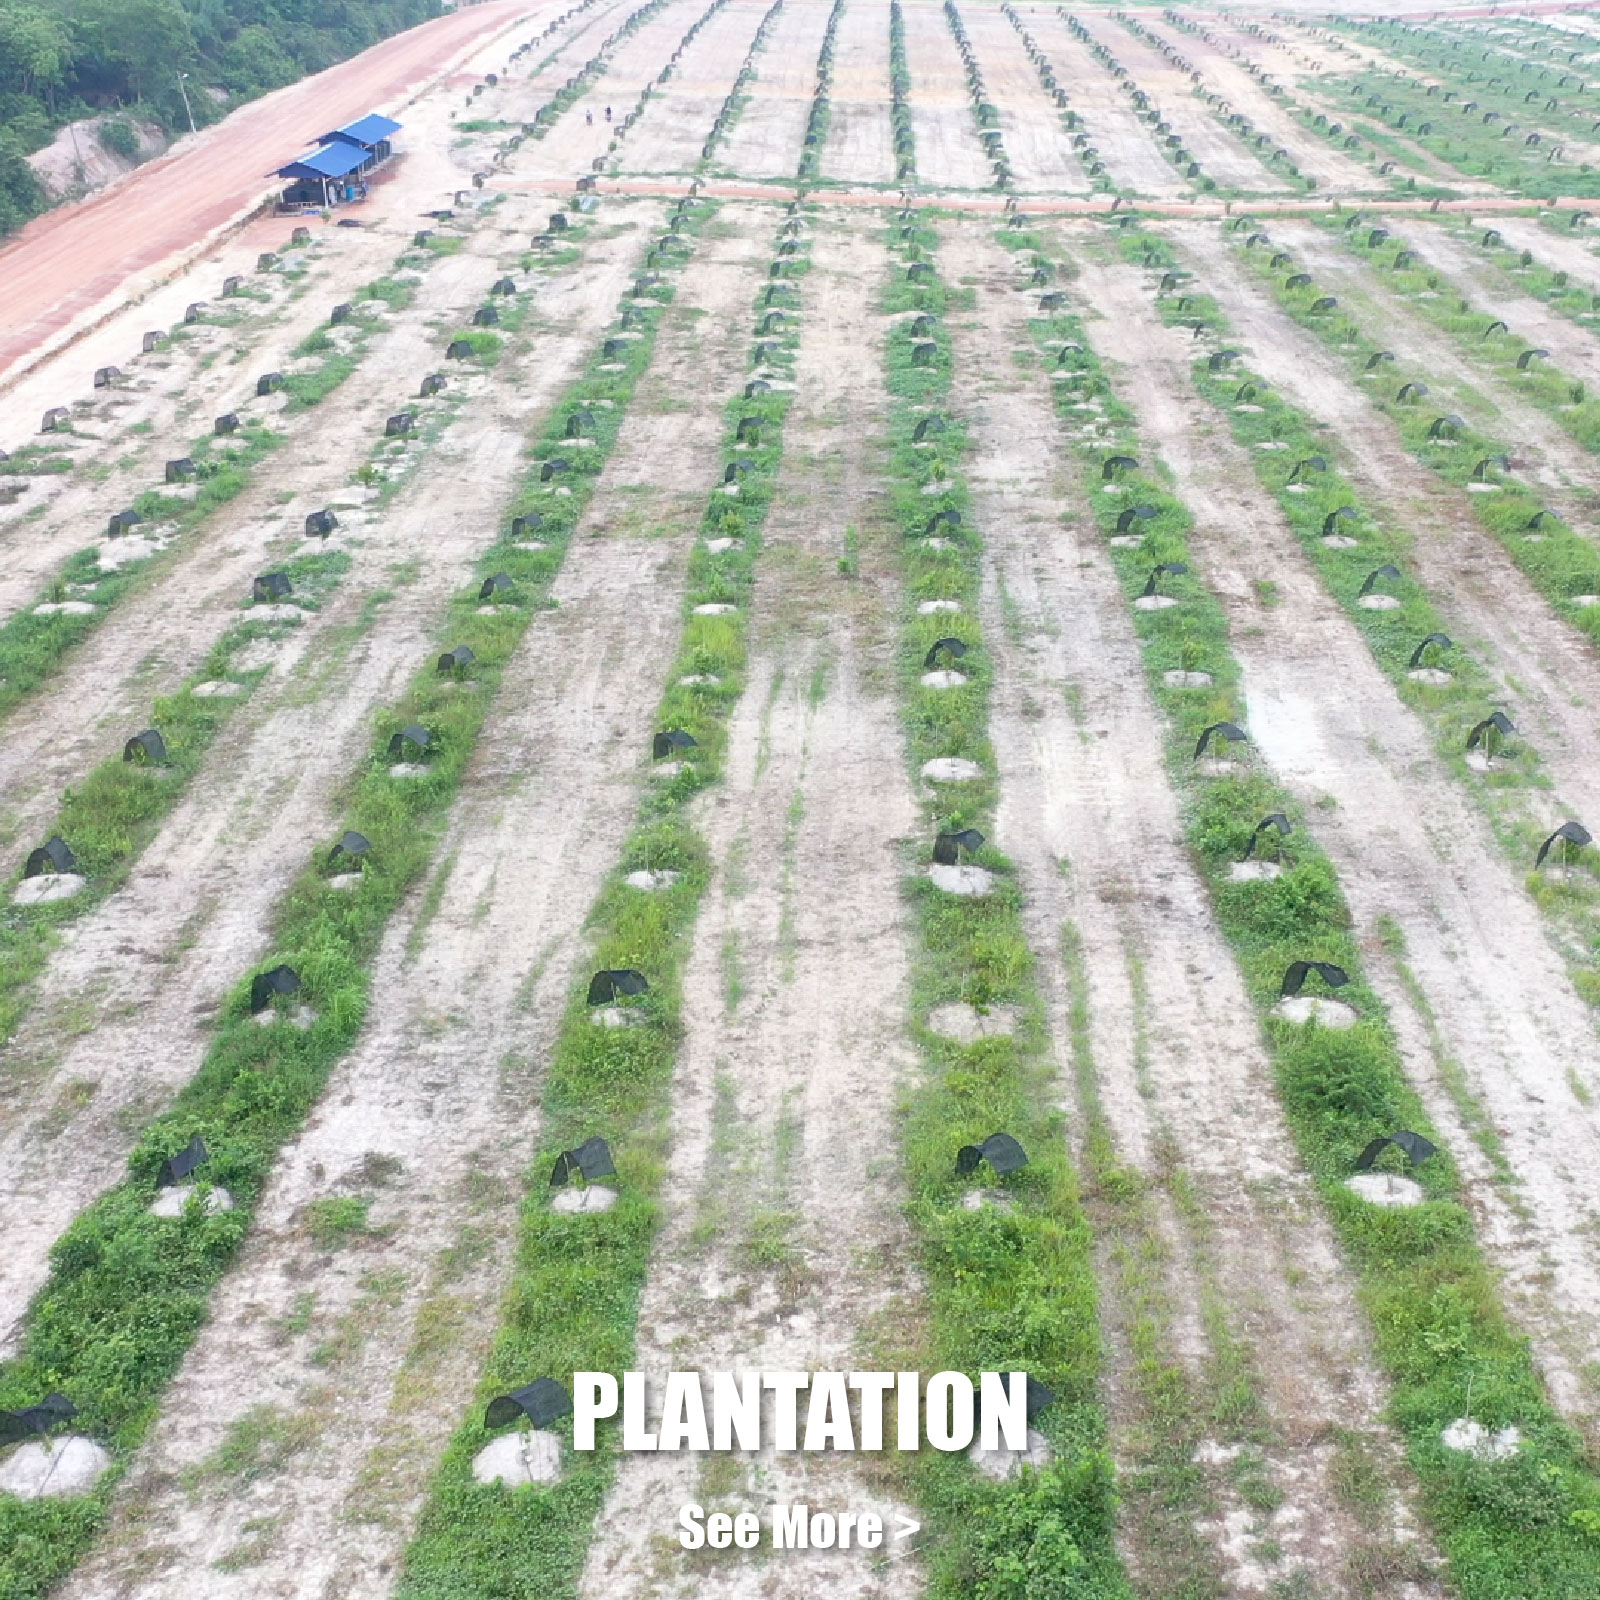 Plantation Image - Our Businesses Section - Homepage